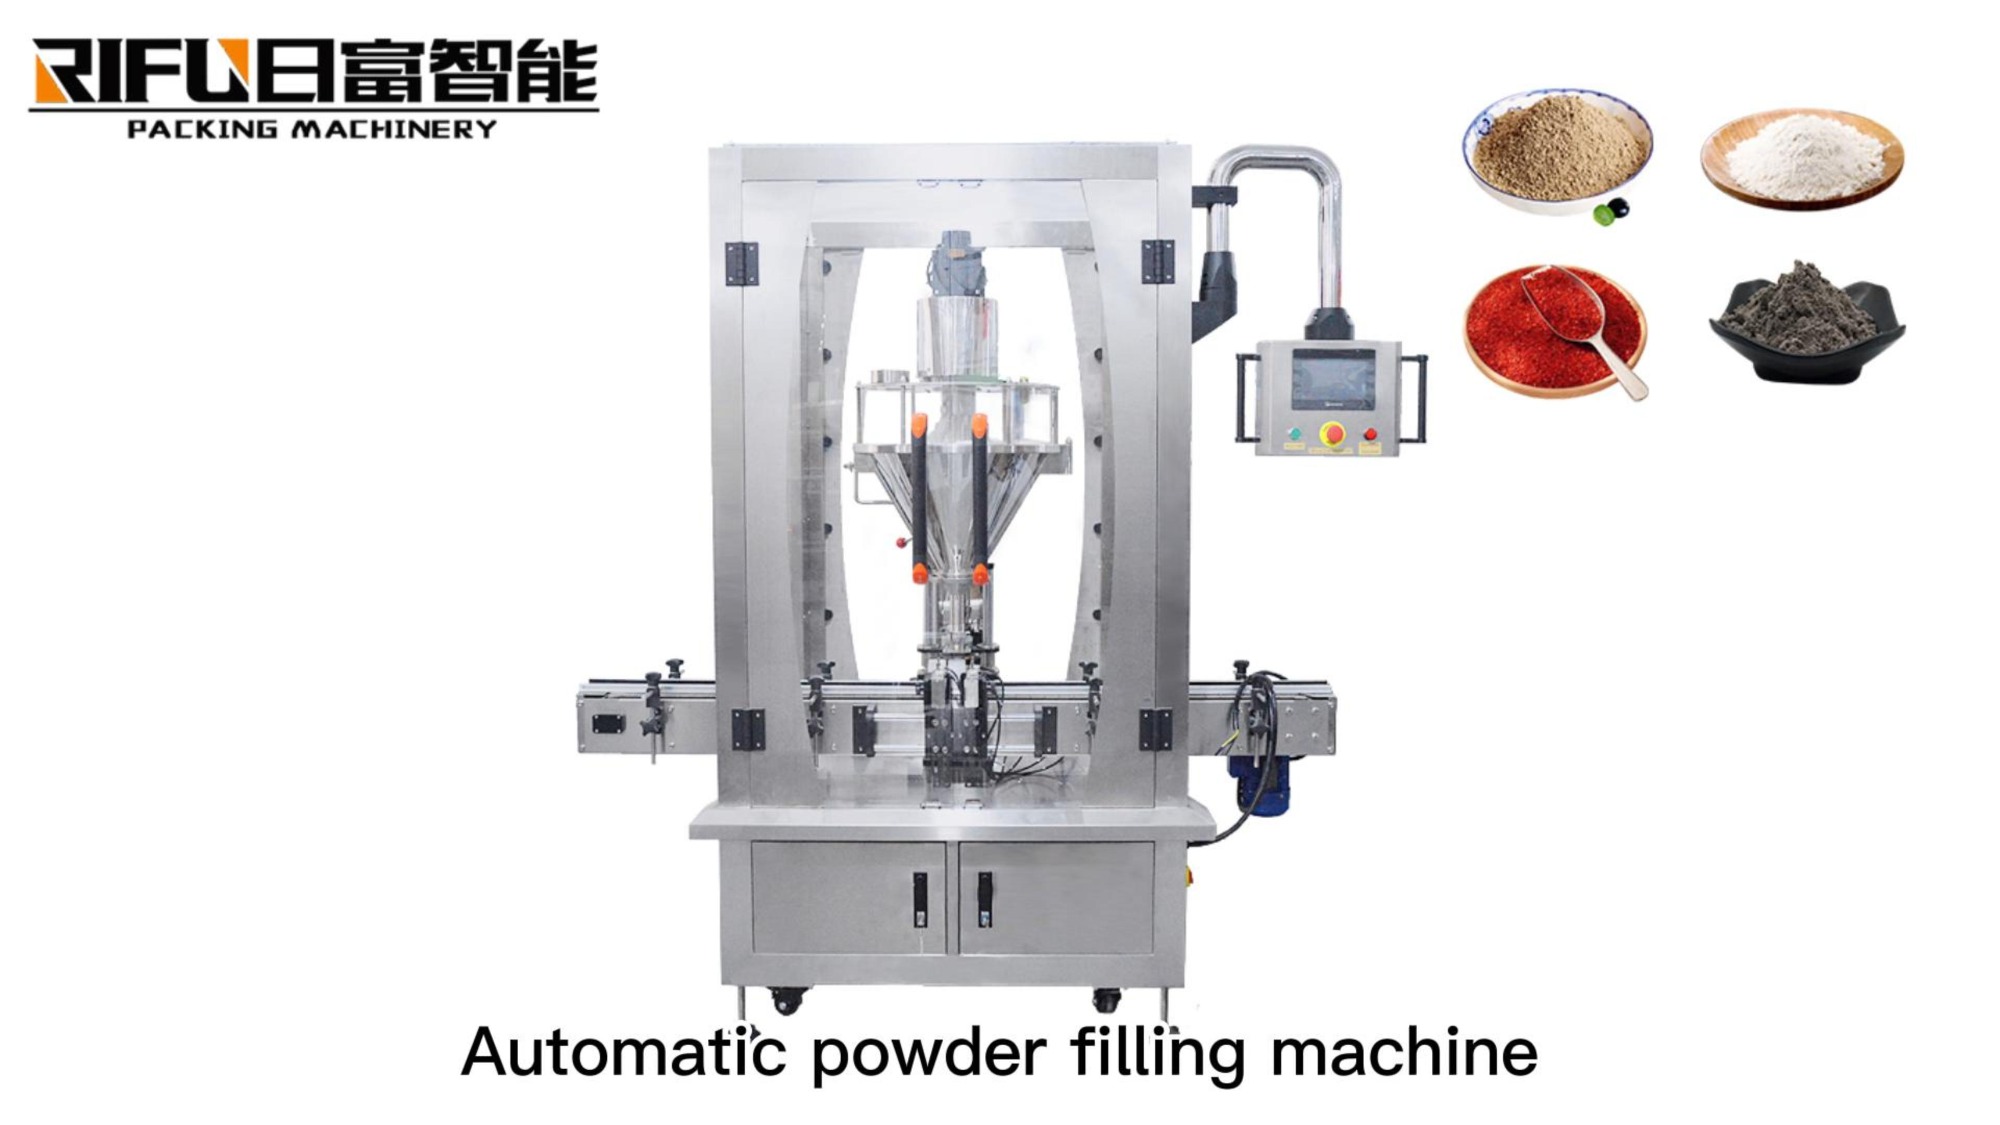 Test video of automatic powder filling machine